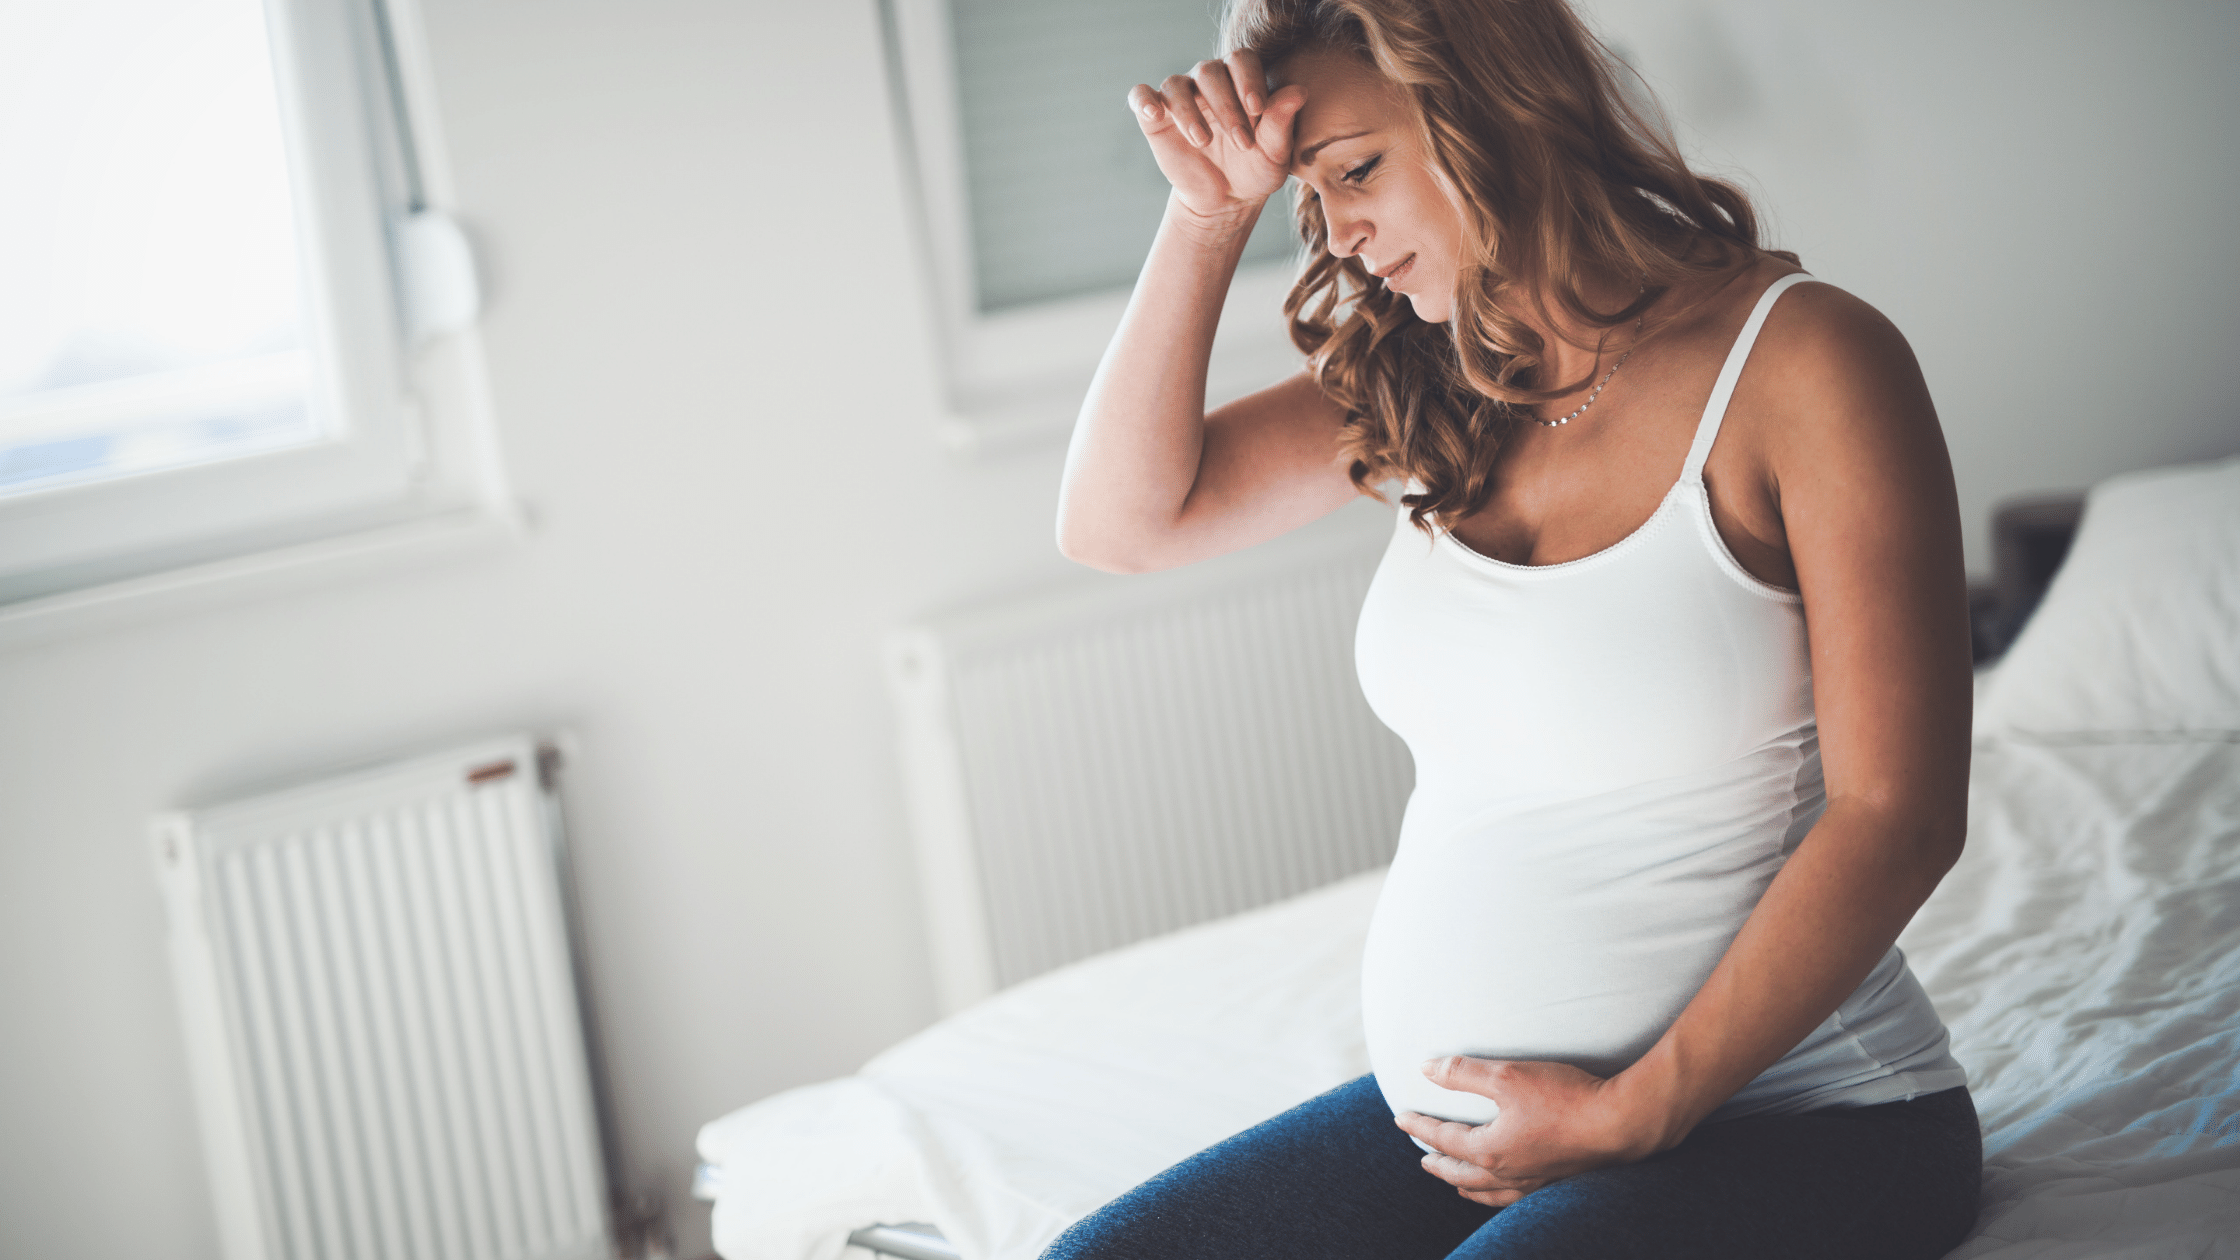 Dealing with Pregnancy Complications